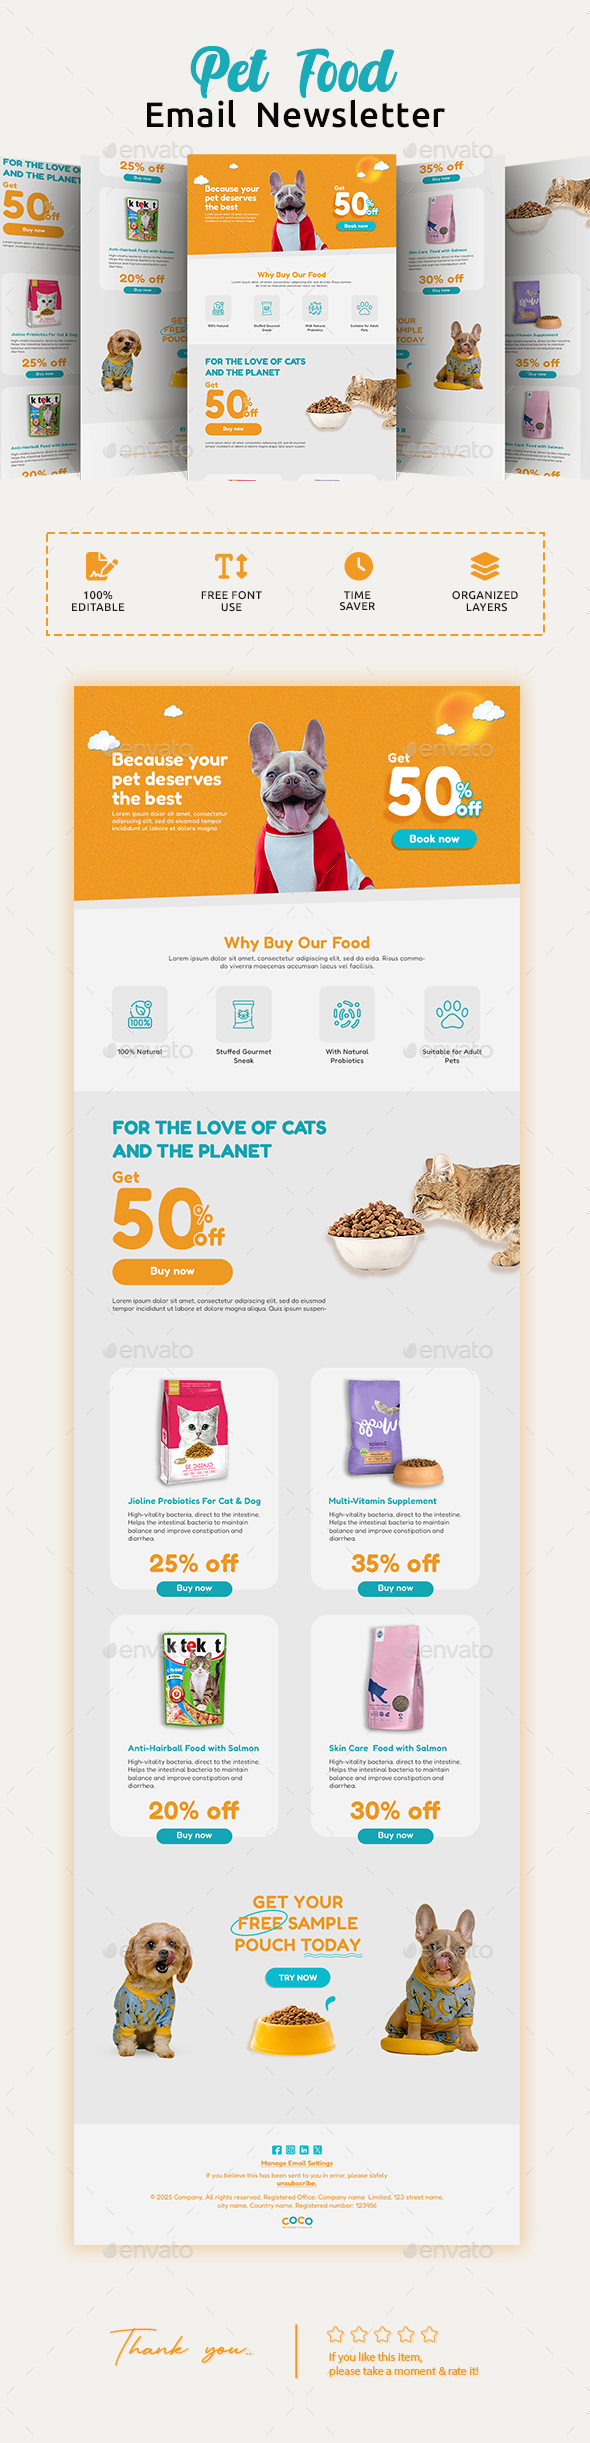 Pet Food Email Newsletter PSD Template.